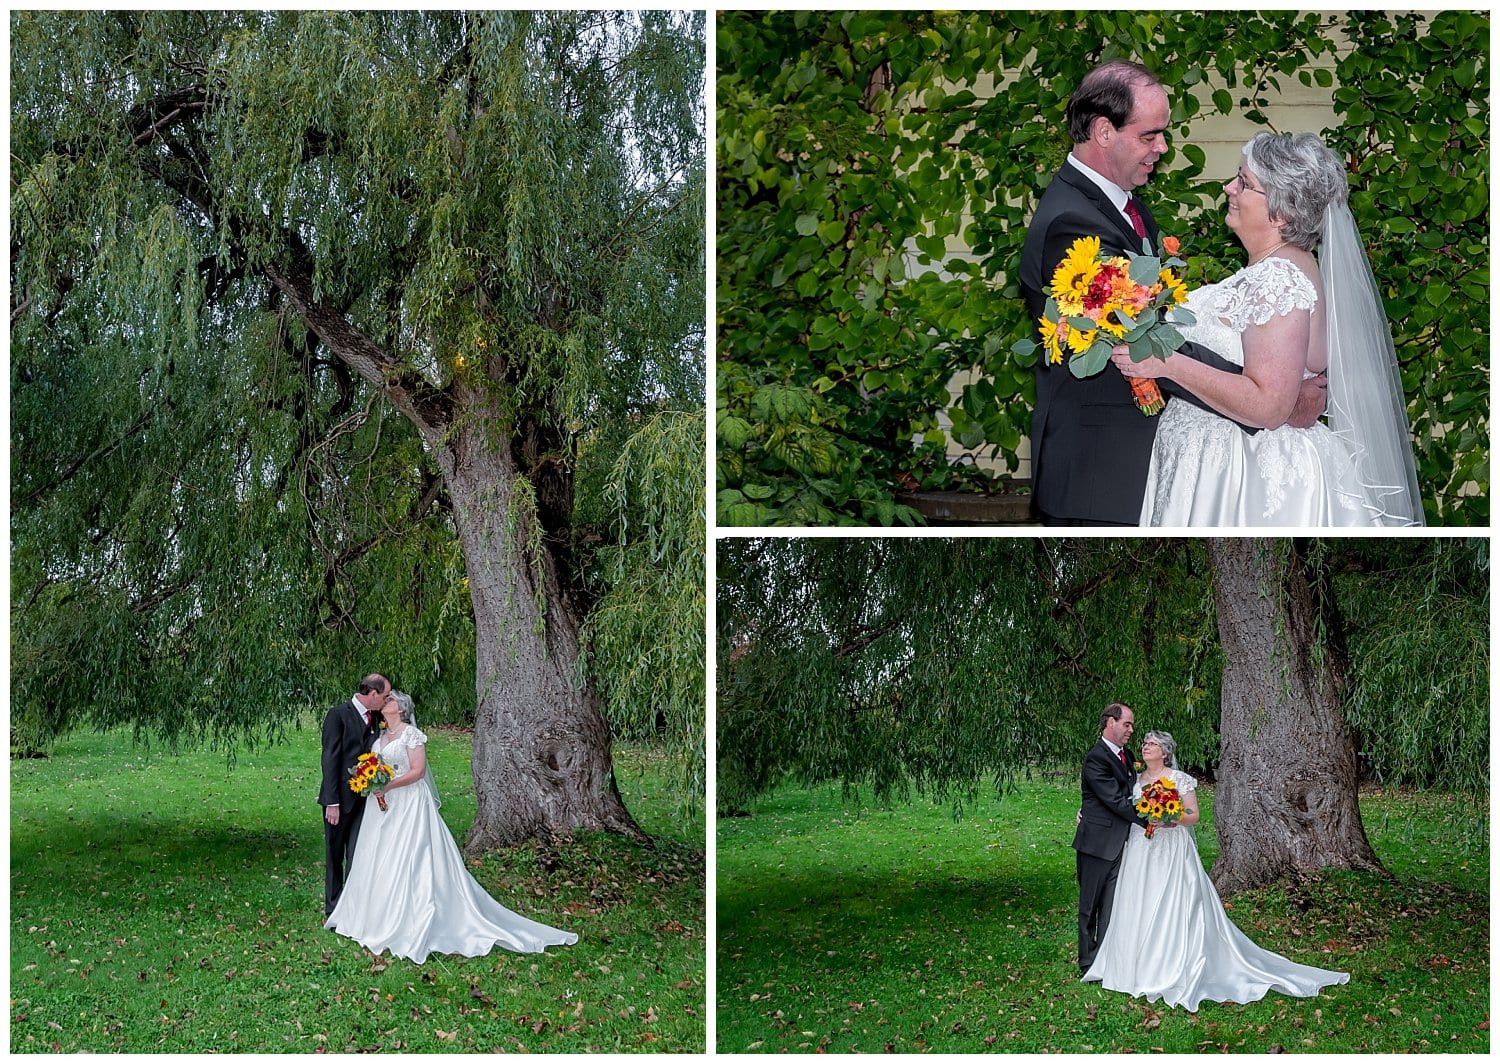 The bride and groom pose for wedding photos under a huge willow tree in Windsor NS.